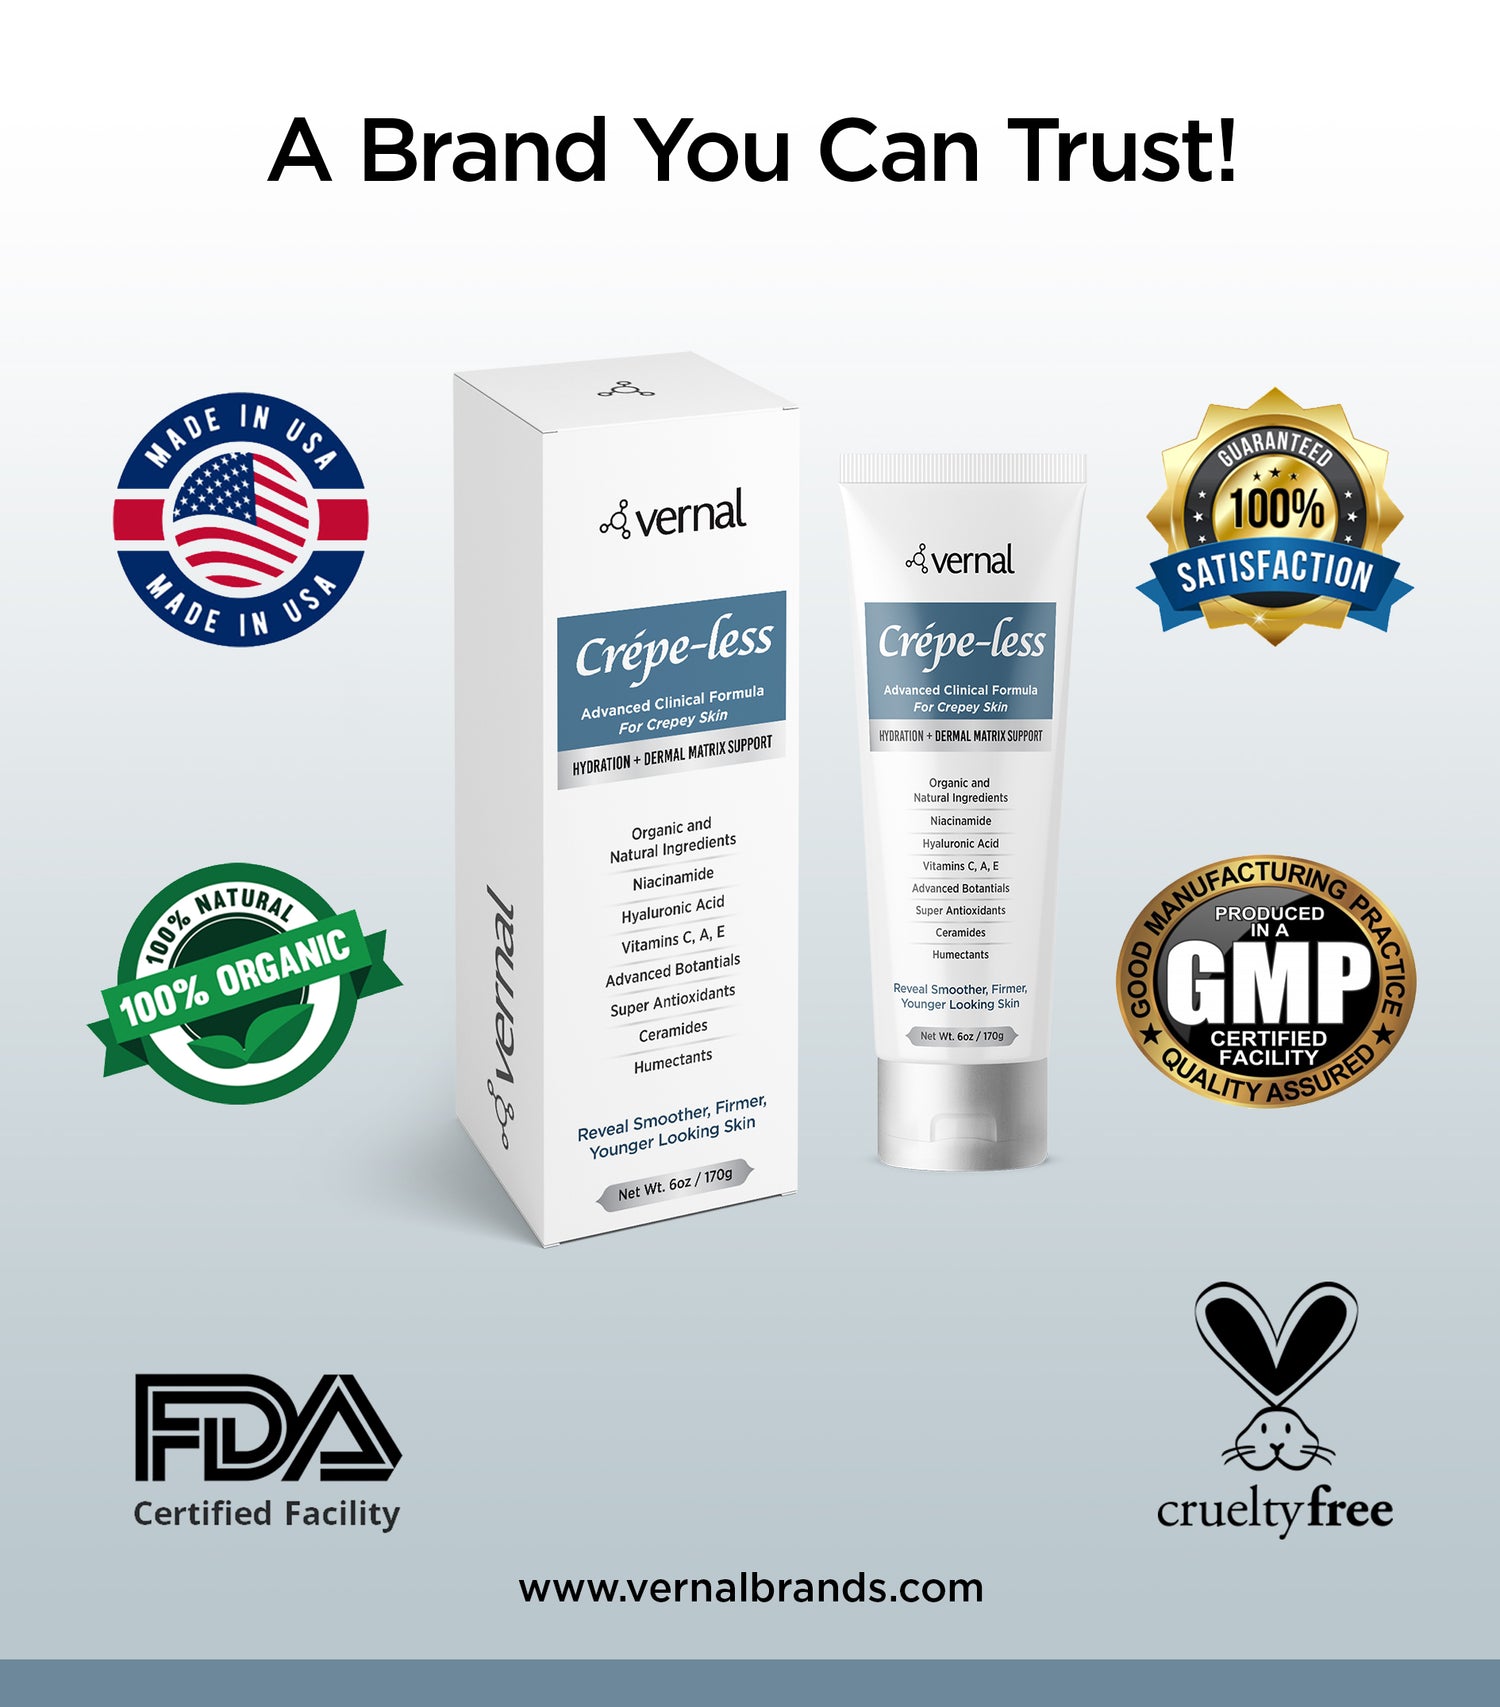 Crepey skin firming cream to repair crepey arms, neck, chest and